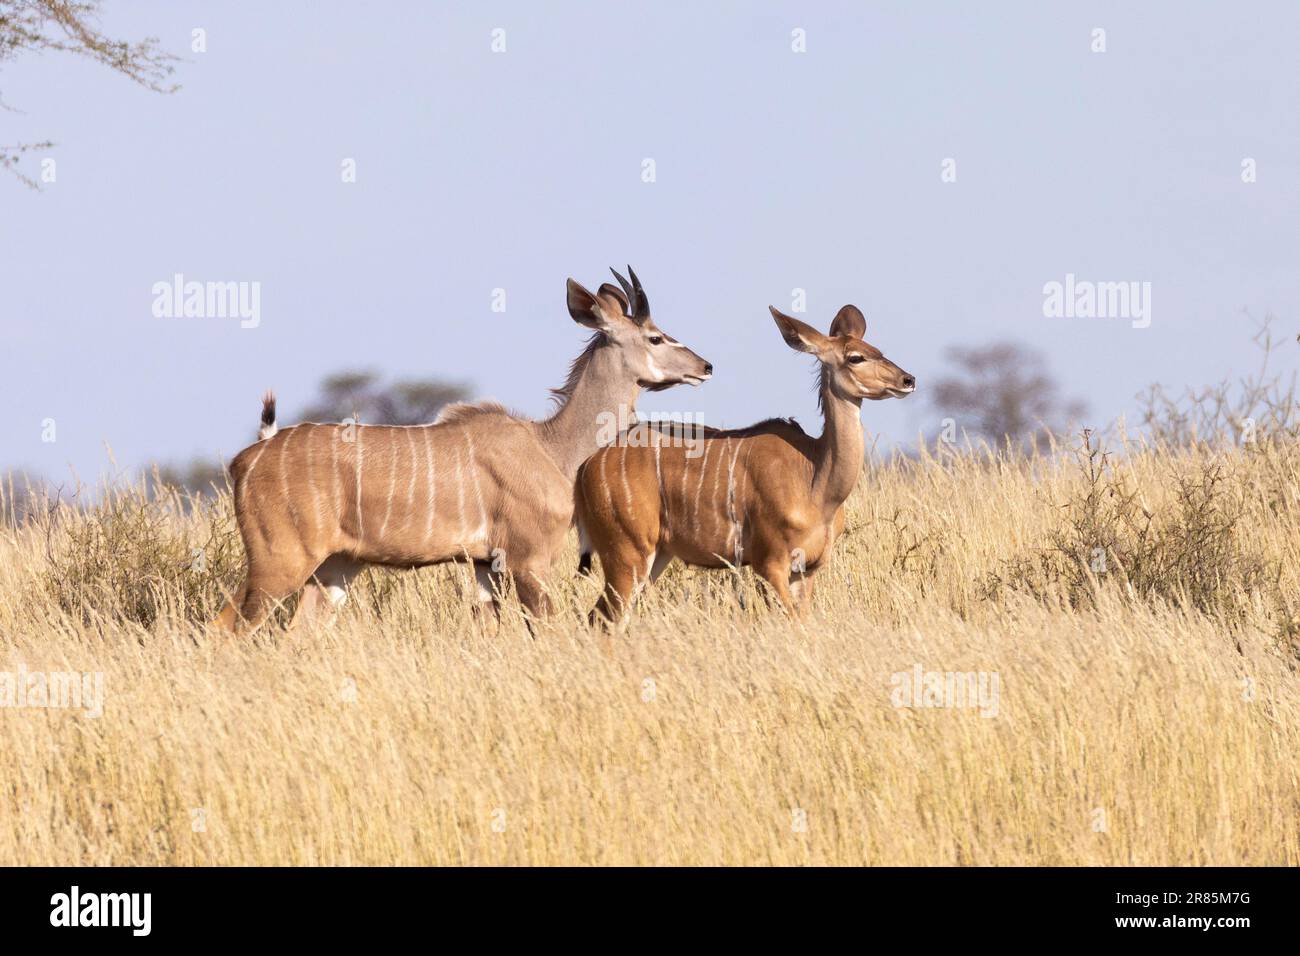 Greater Kudu (Tragelaphus strepsiceros) young sub-adult, cow and bull, Kgalagadi Transfrontier Park, Kalahari, Northern Cape, South Africa Stock Photo